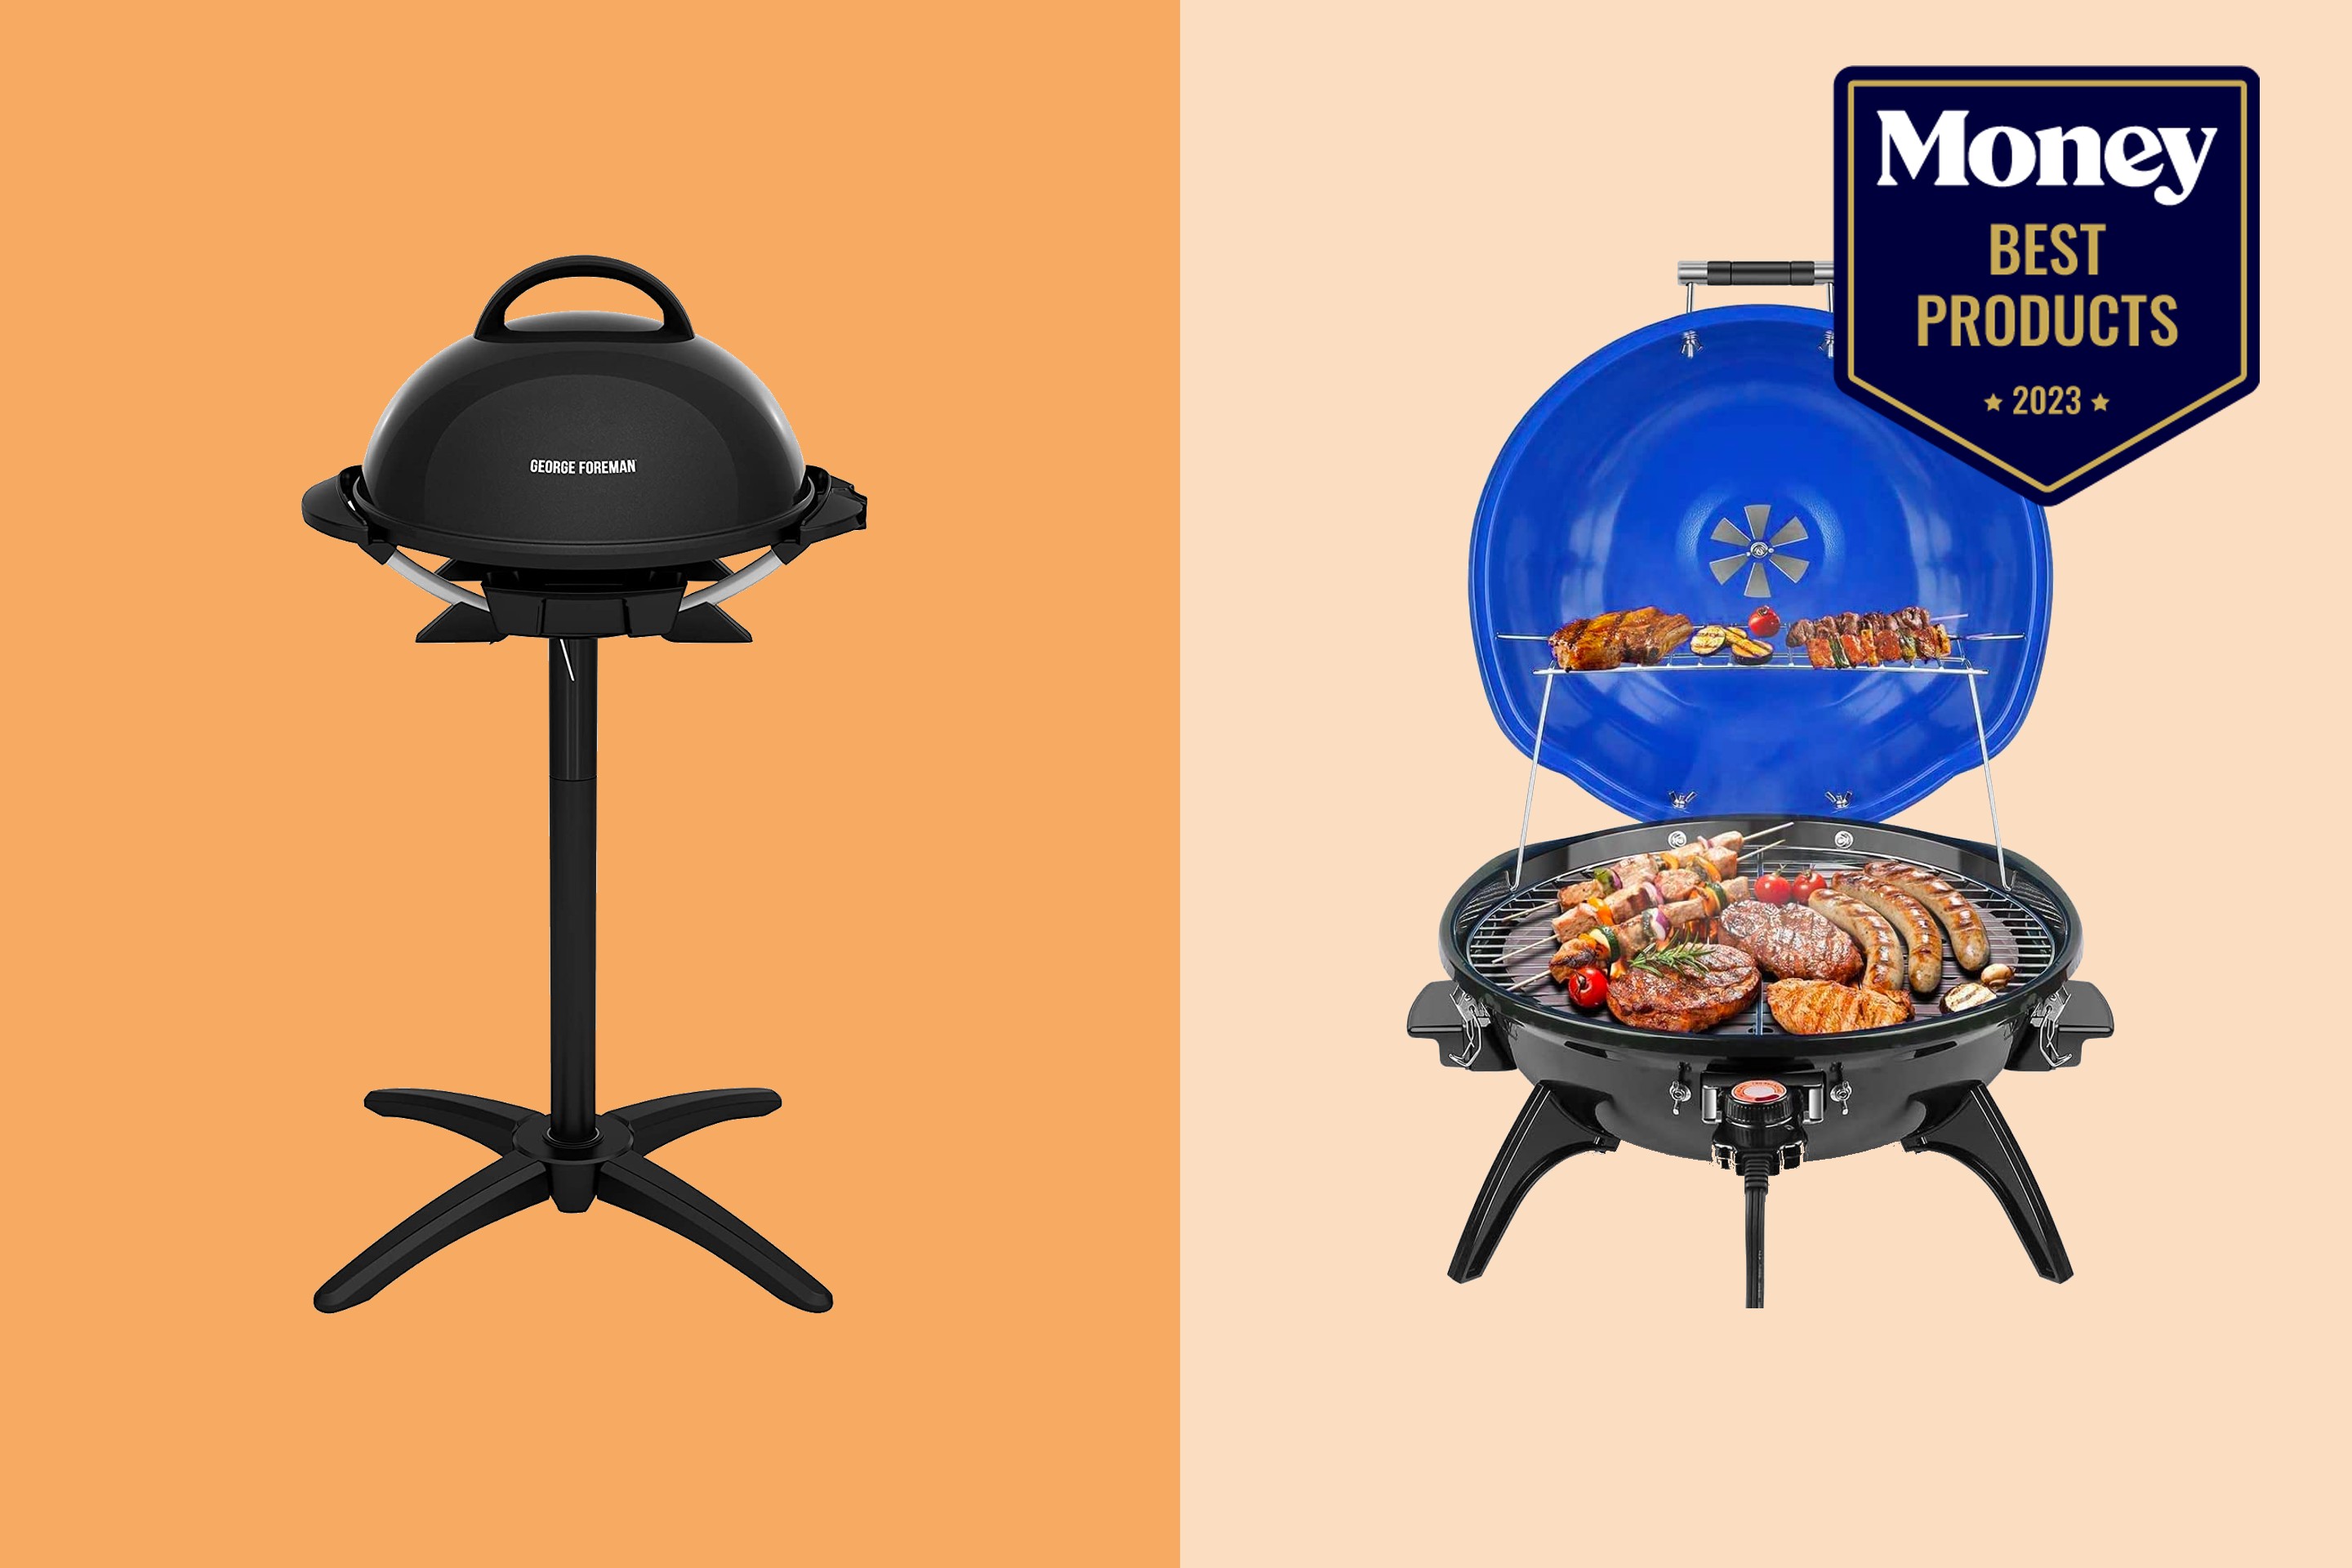 https://img.money.com/2023/06/Shopping-Review-Best-Outdoor-Electric-Grill.jpeg